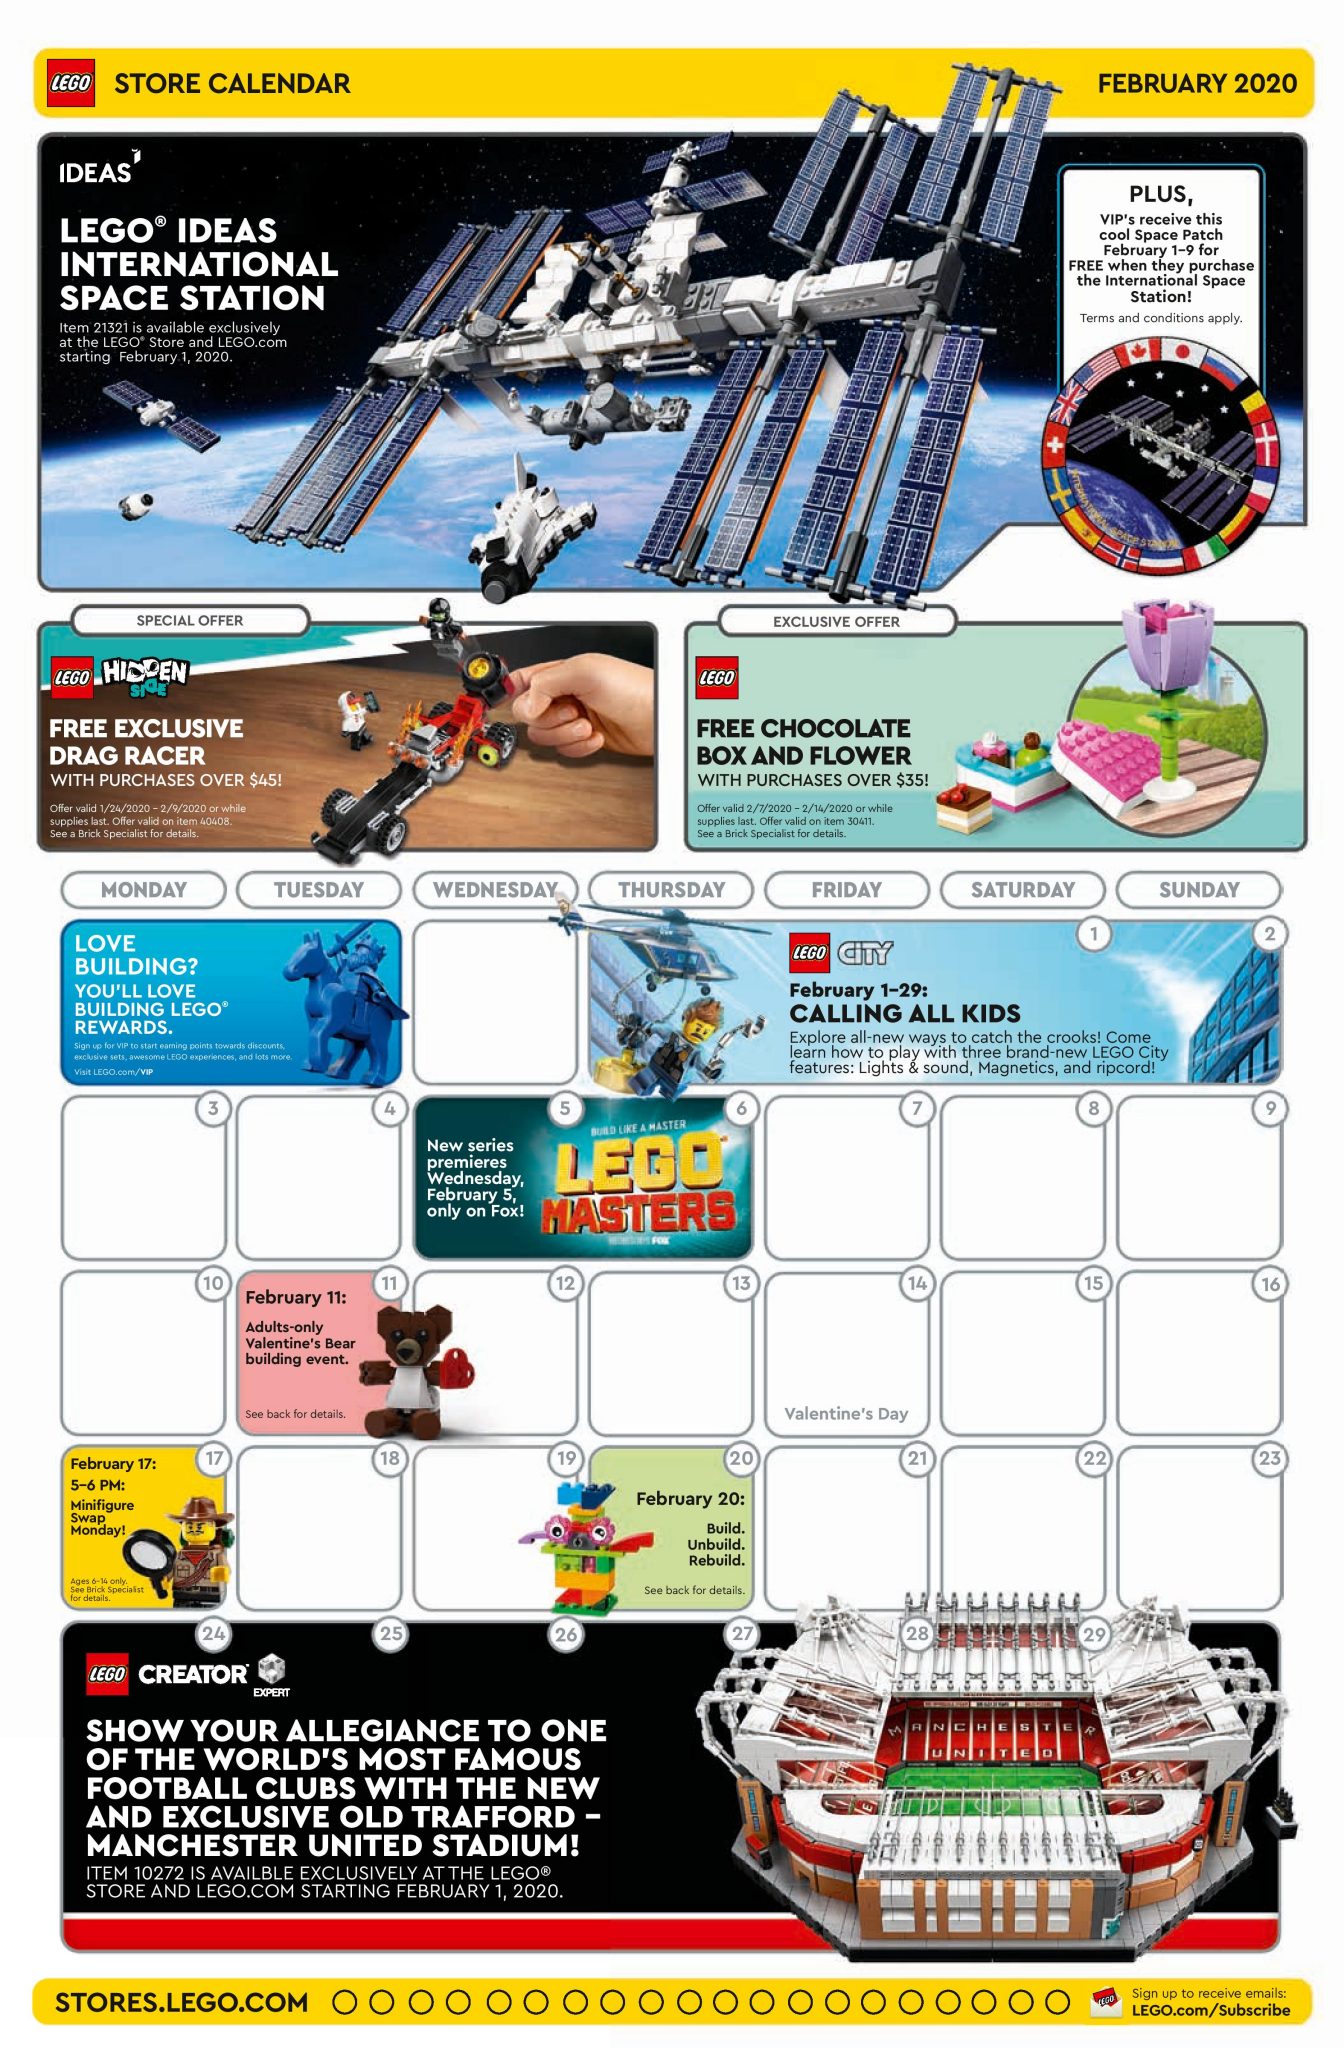 LEGO February 2020 Store Calendar Promotions & Events The Brick Fan